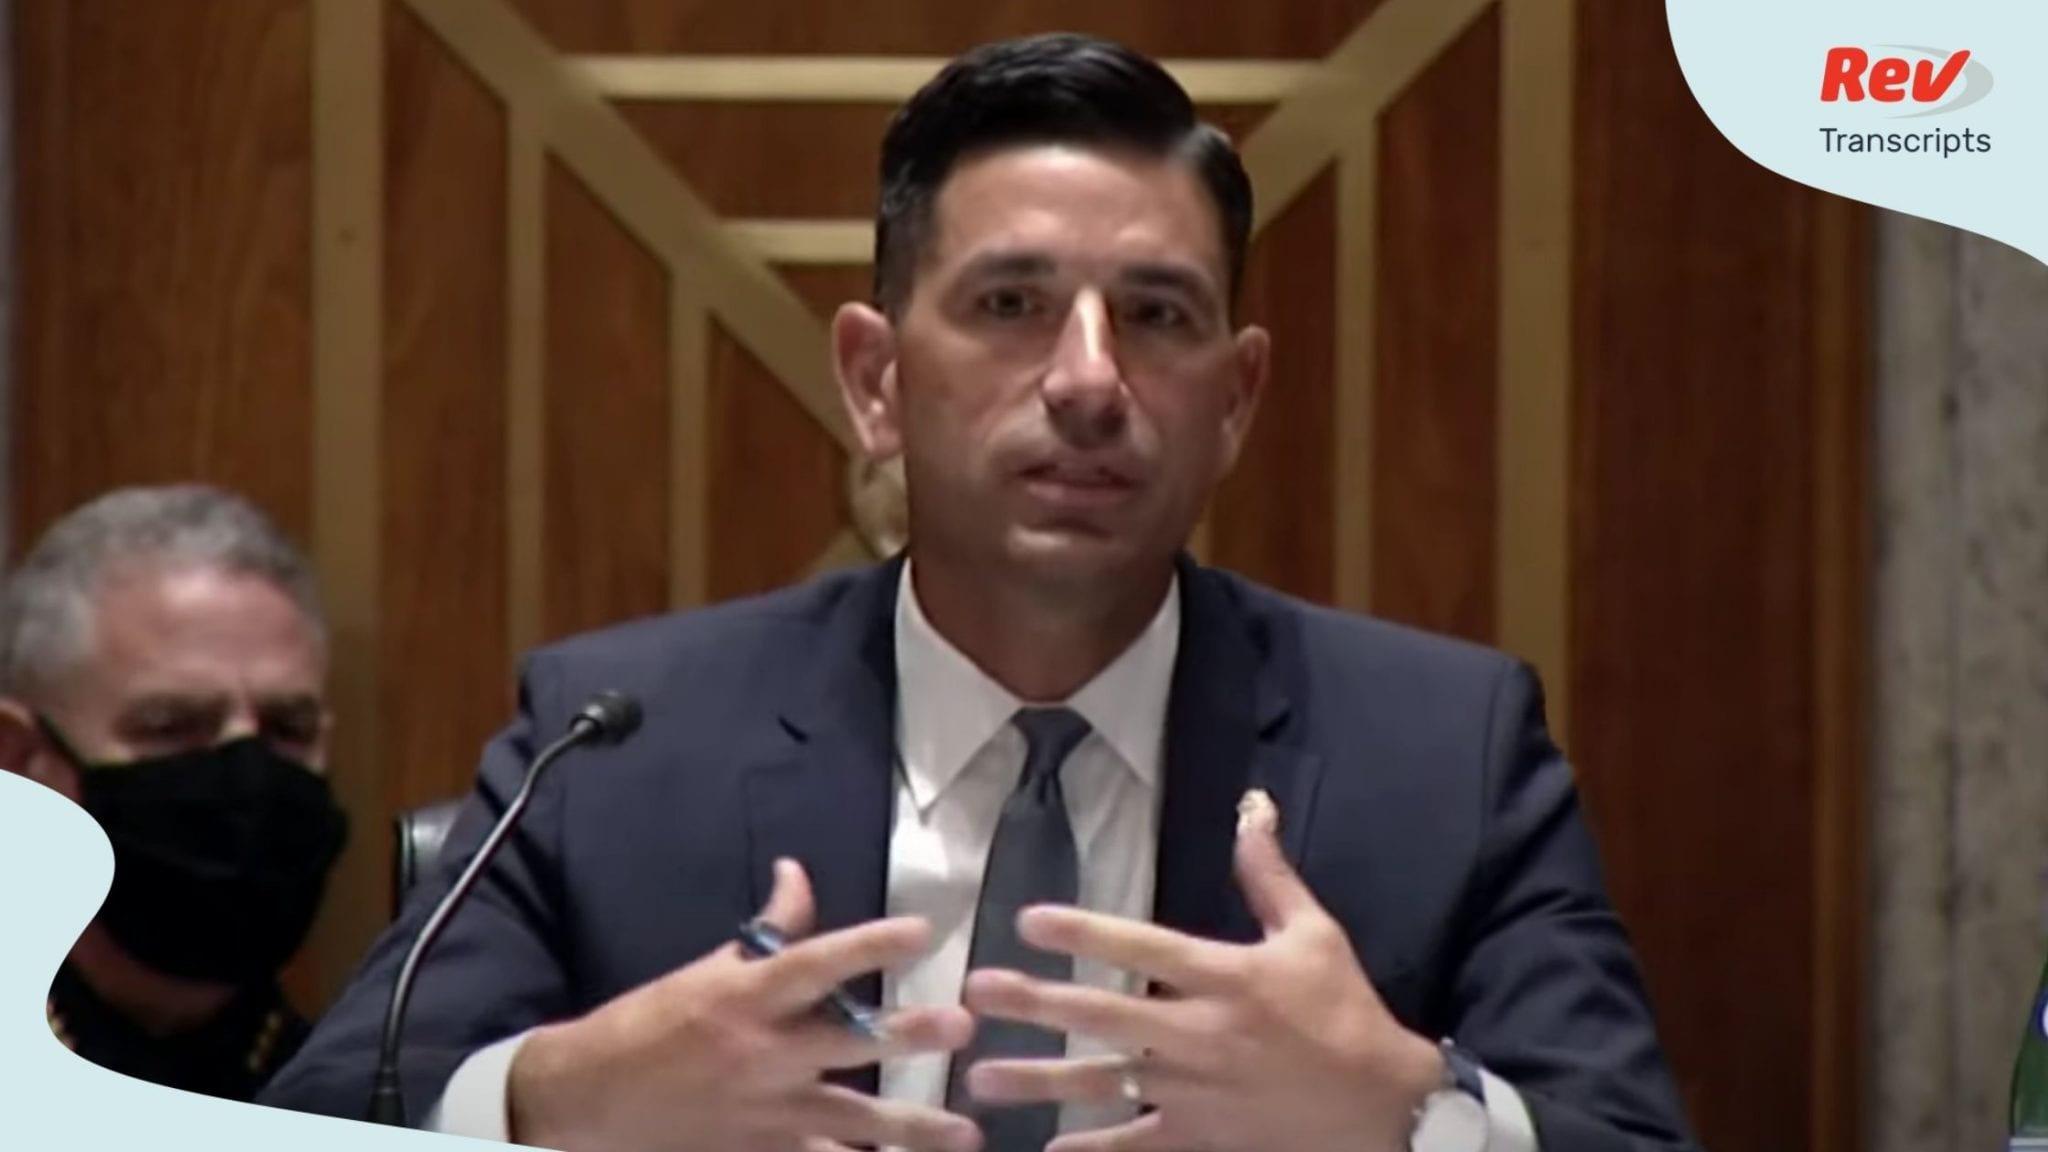 Senate Oversight Hearing Transcript: DHS Personnel Deployments to Protests